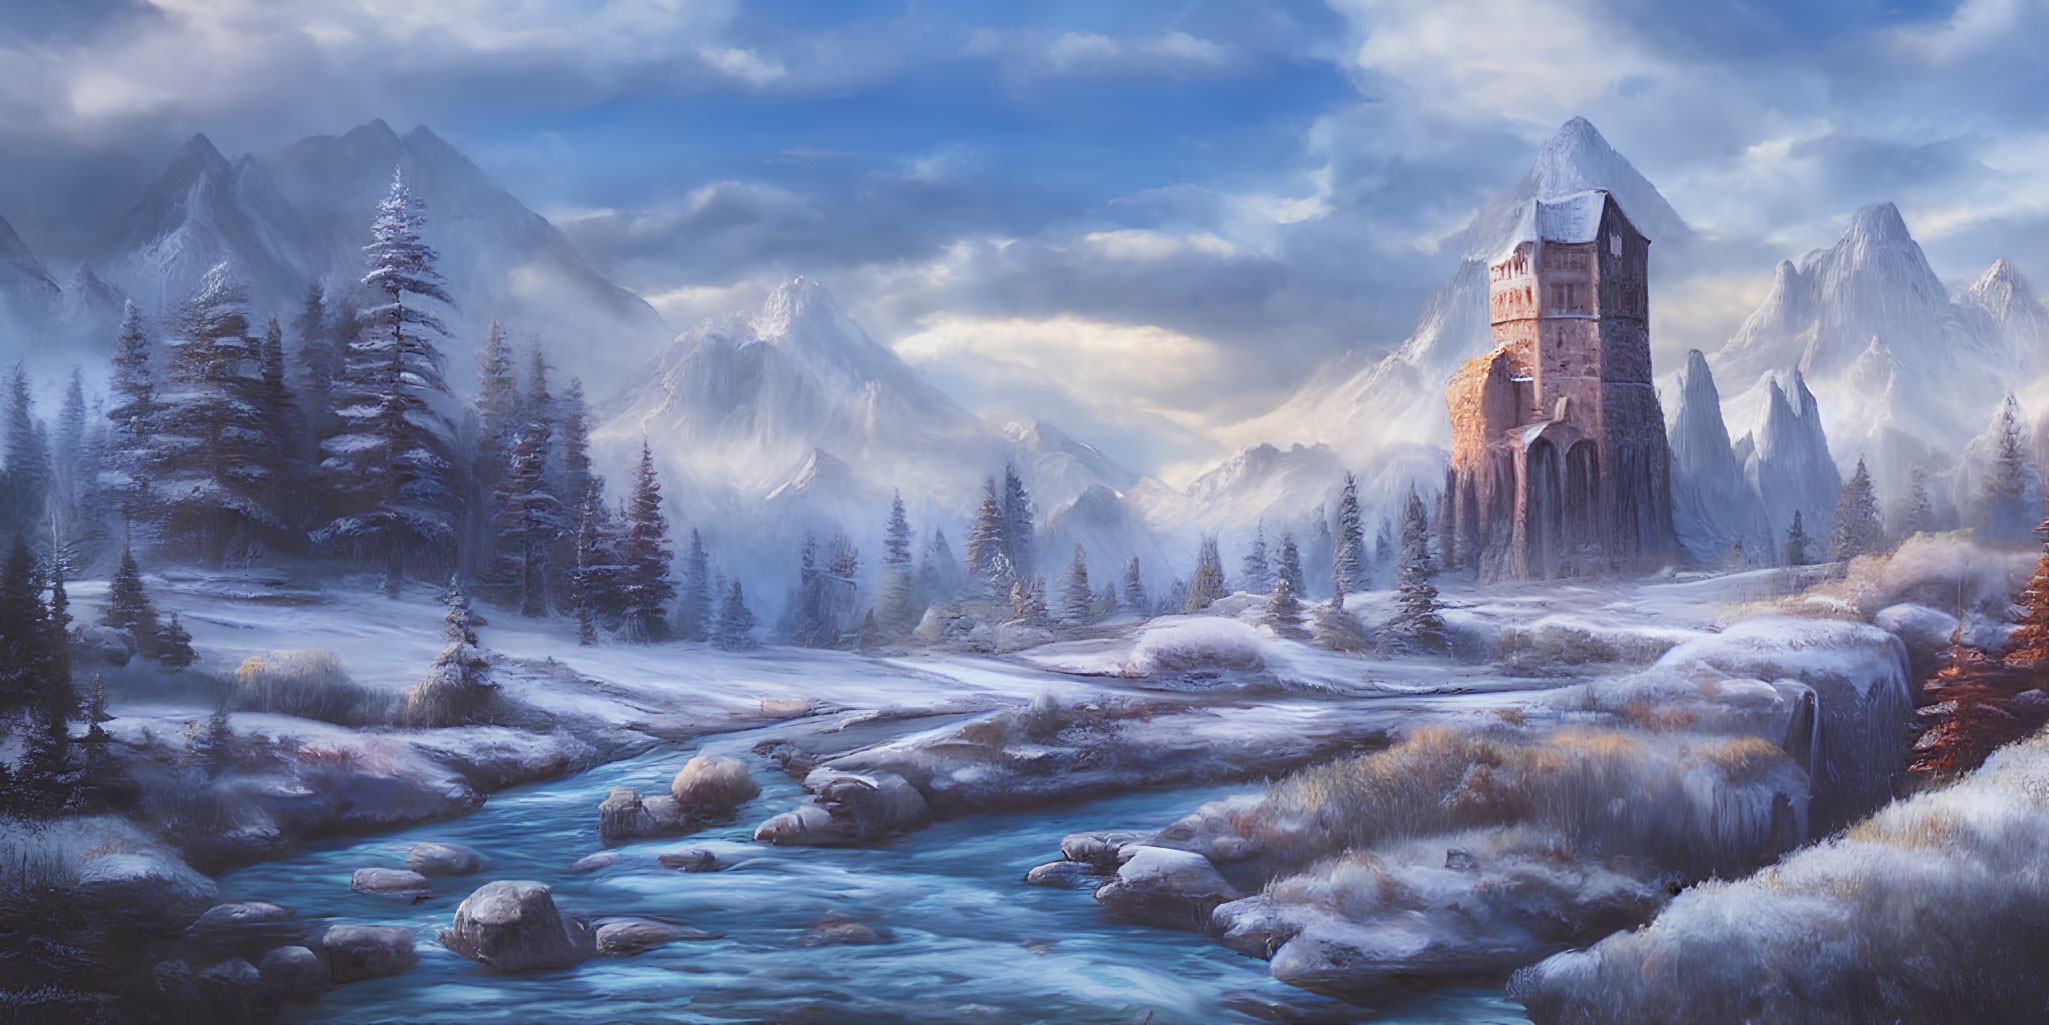 Winter landscape: river, snow-covered trees, tower, mountains, cloudy sky